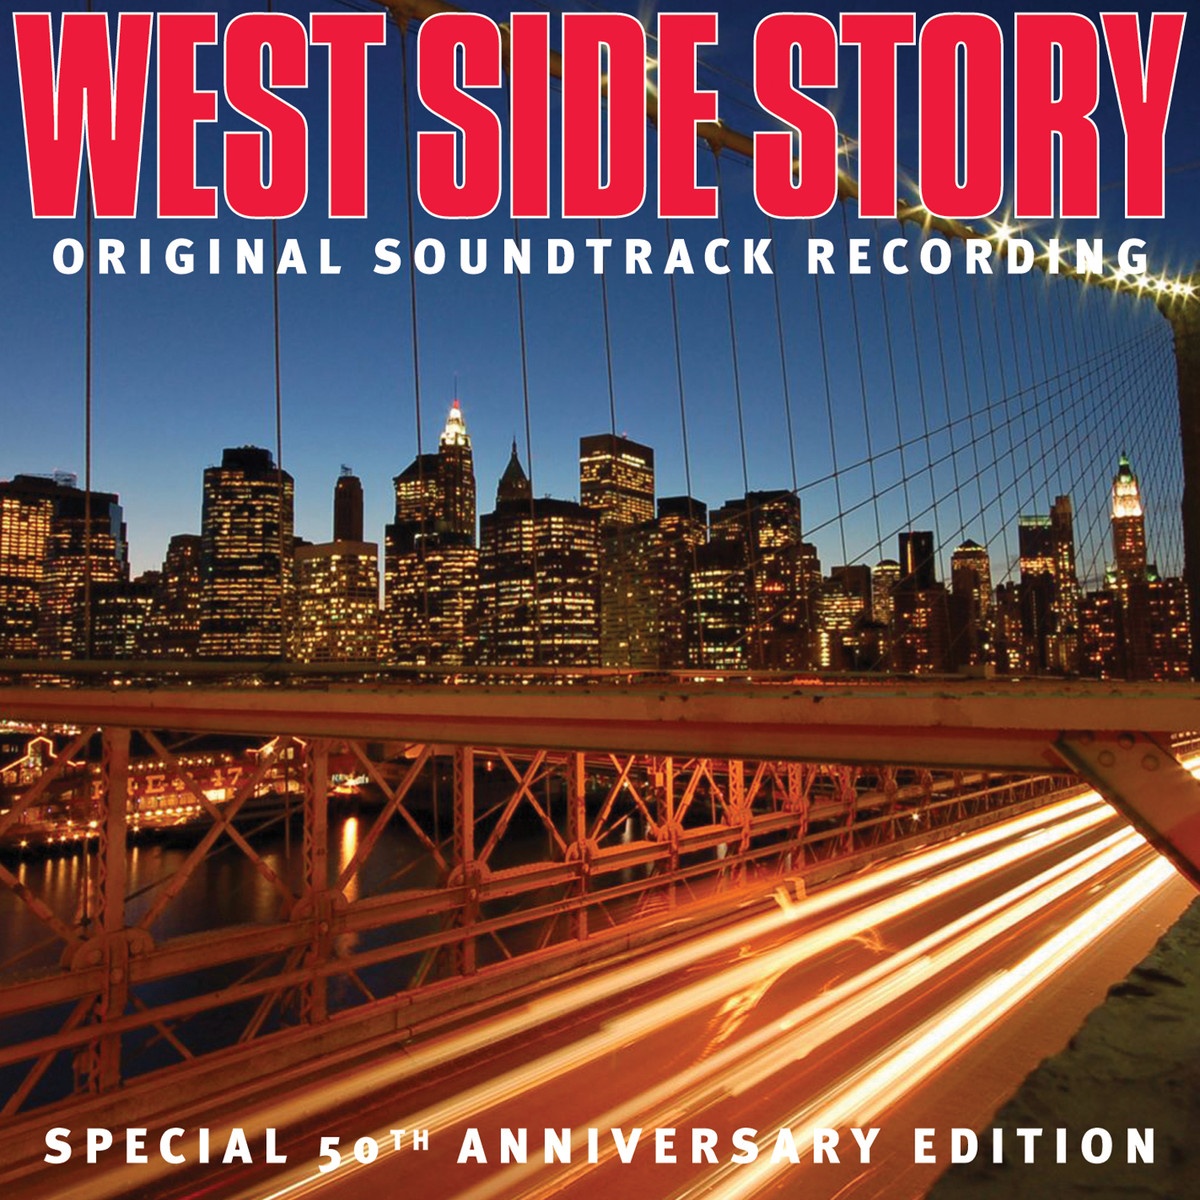 West Side Story (O.S.T Recording)